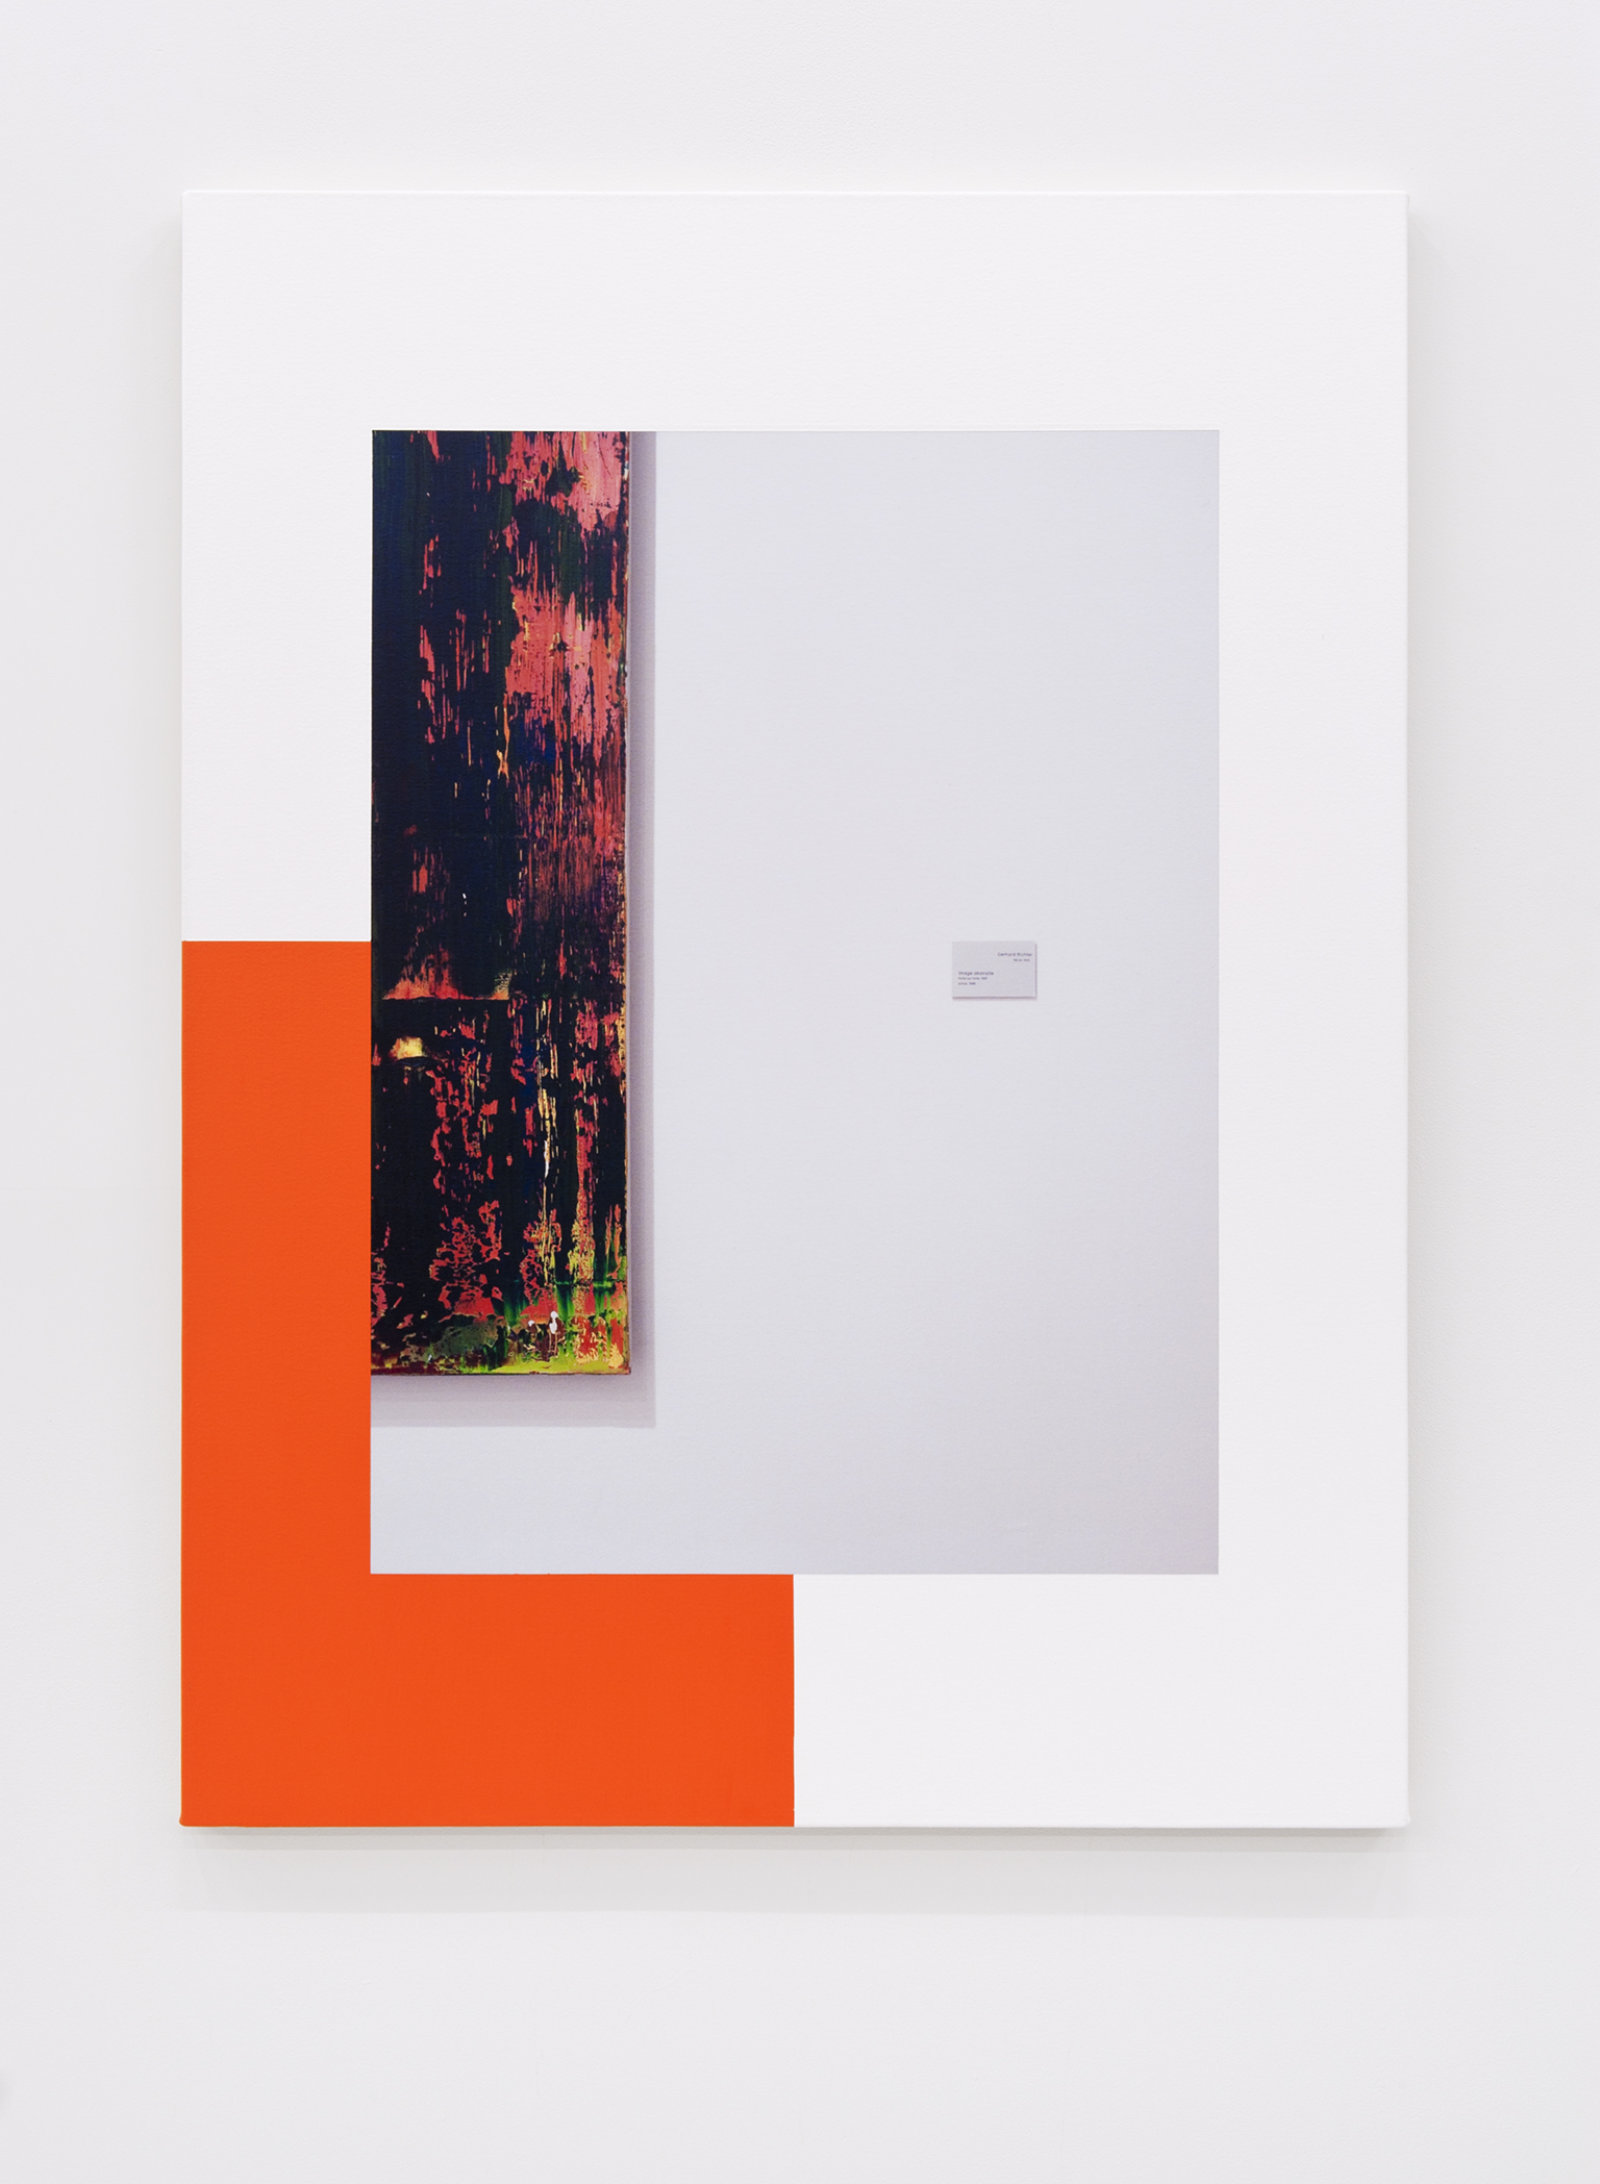 Ian Wallace, Abstract Composition (with Richter), 2012, photolaminate with acrylic on canvas, 48 x 36 in. (122 x 91 cm)